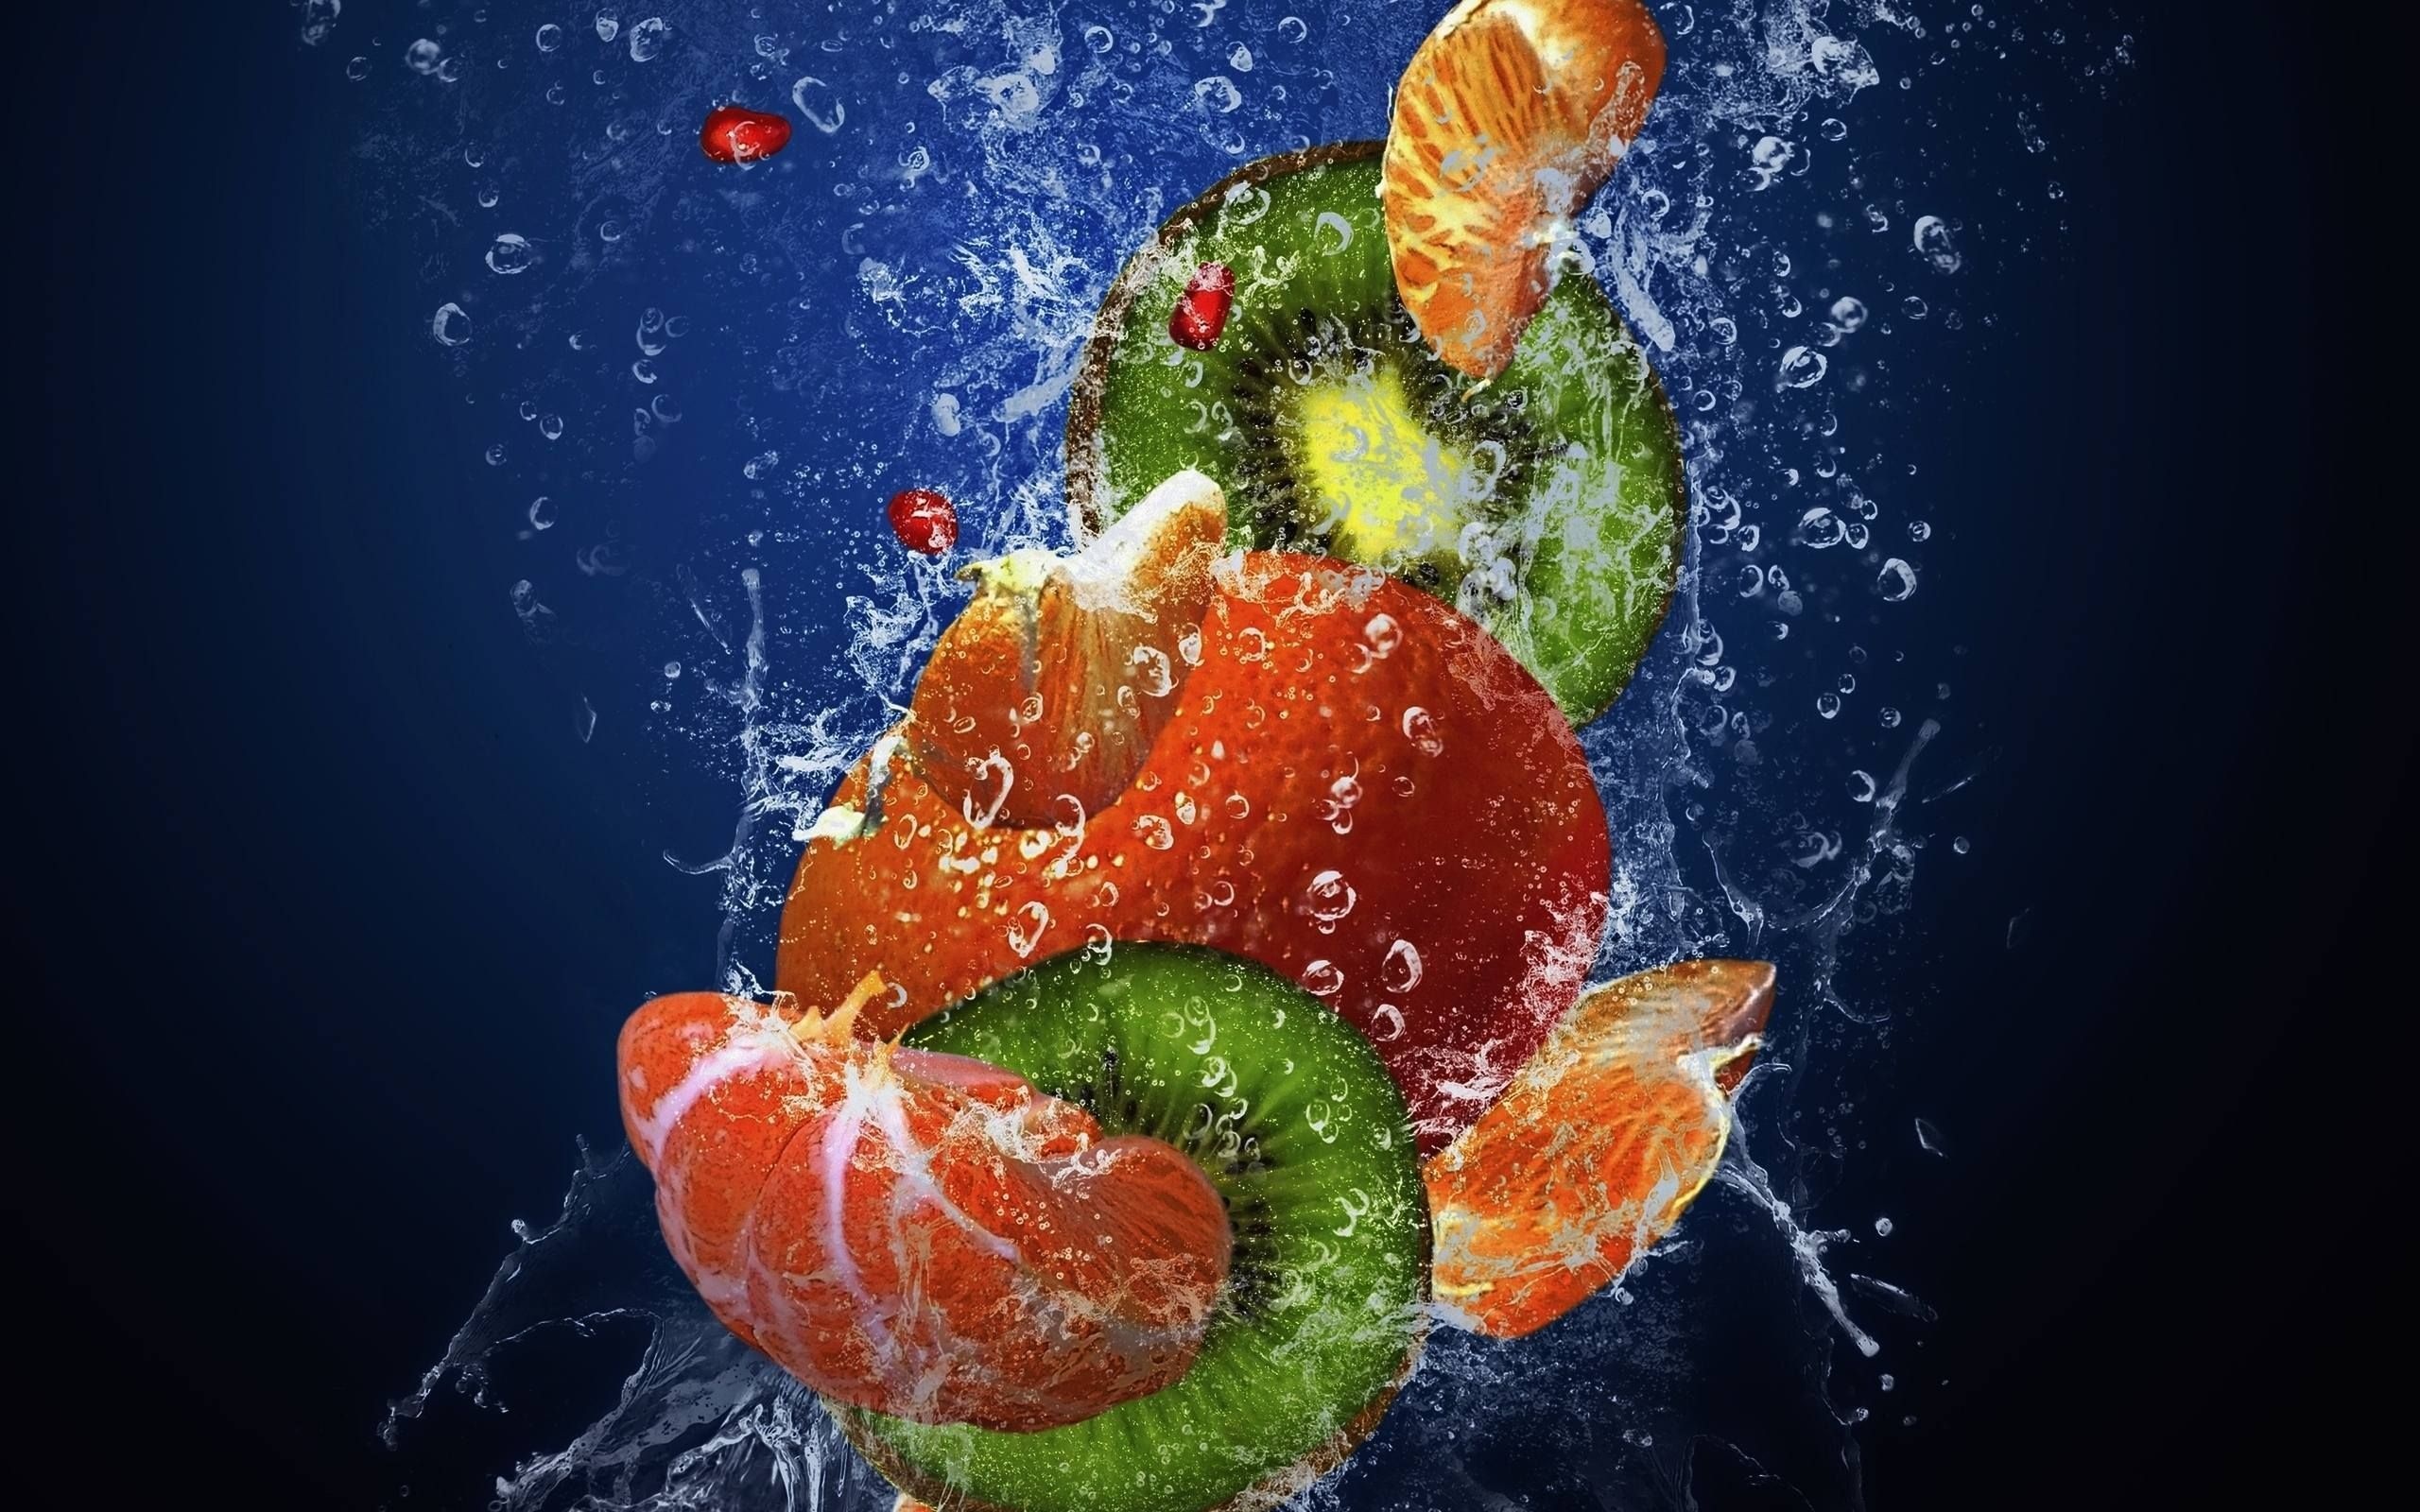 Fruit water wallpapers, Refreshing visuals, Hydration and flavor, Quenching thirst, 2560x1600 HD Desktop